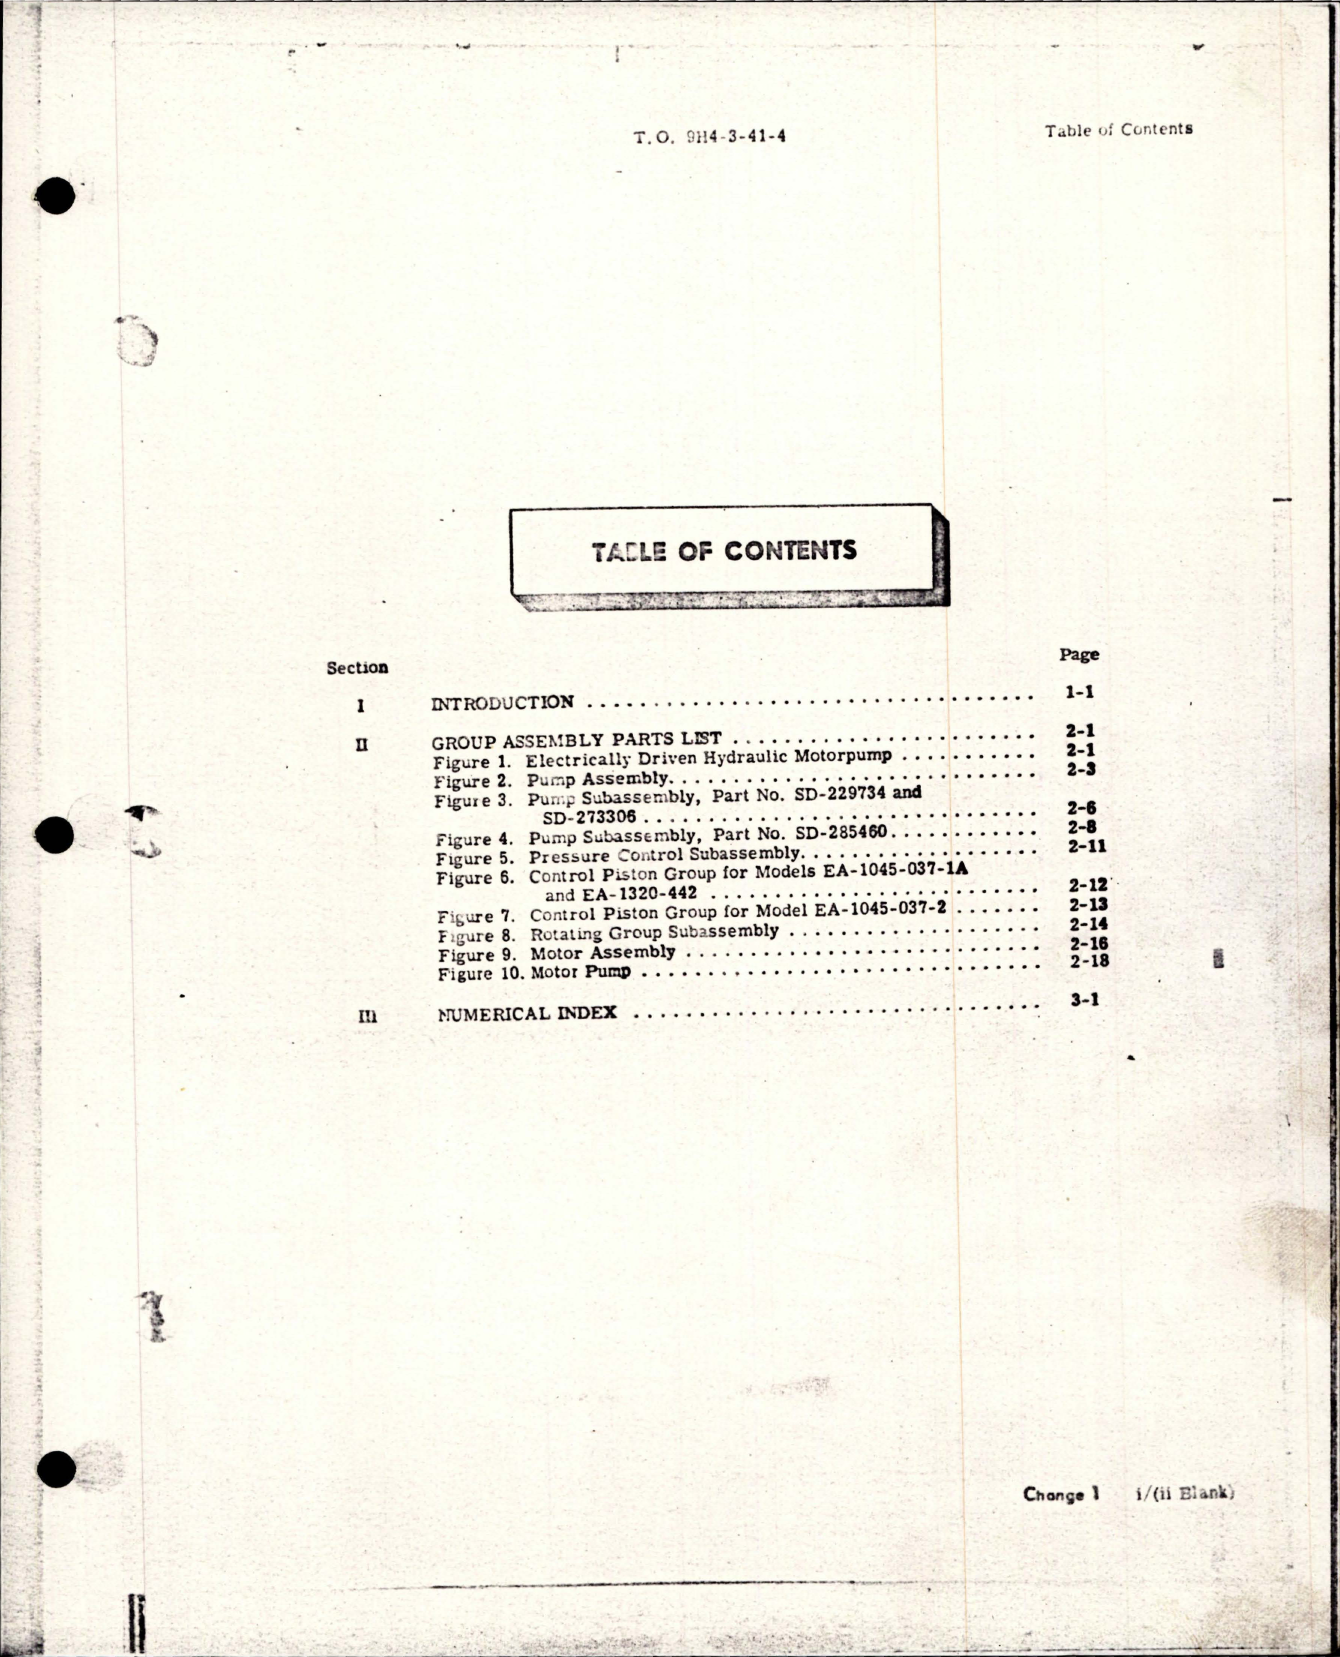 Sample page 7 from AirCorps Library document: Illustrated Parts Breakdown for Electrically Driven Hydraulic Motorpump - Change No. 5